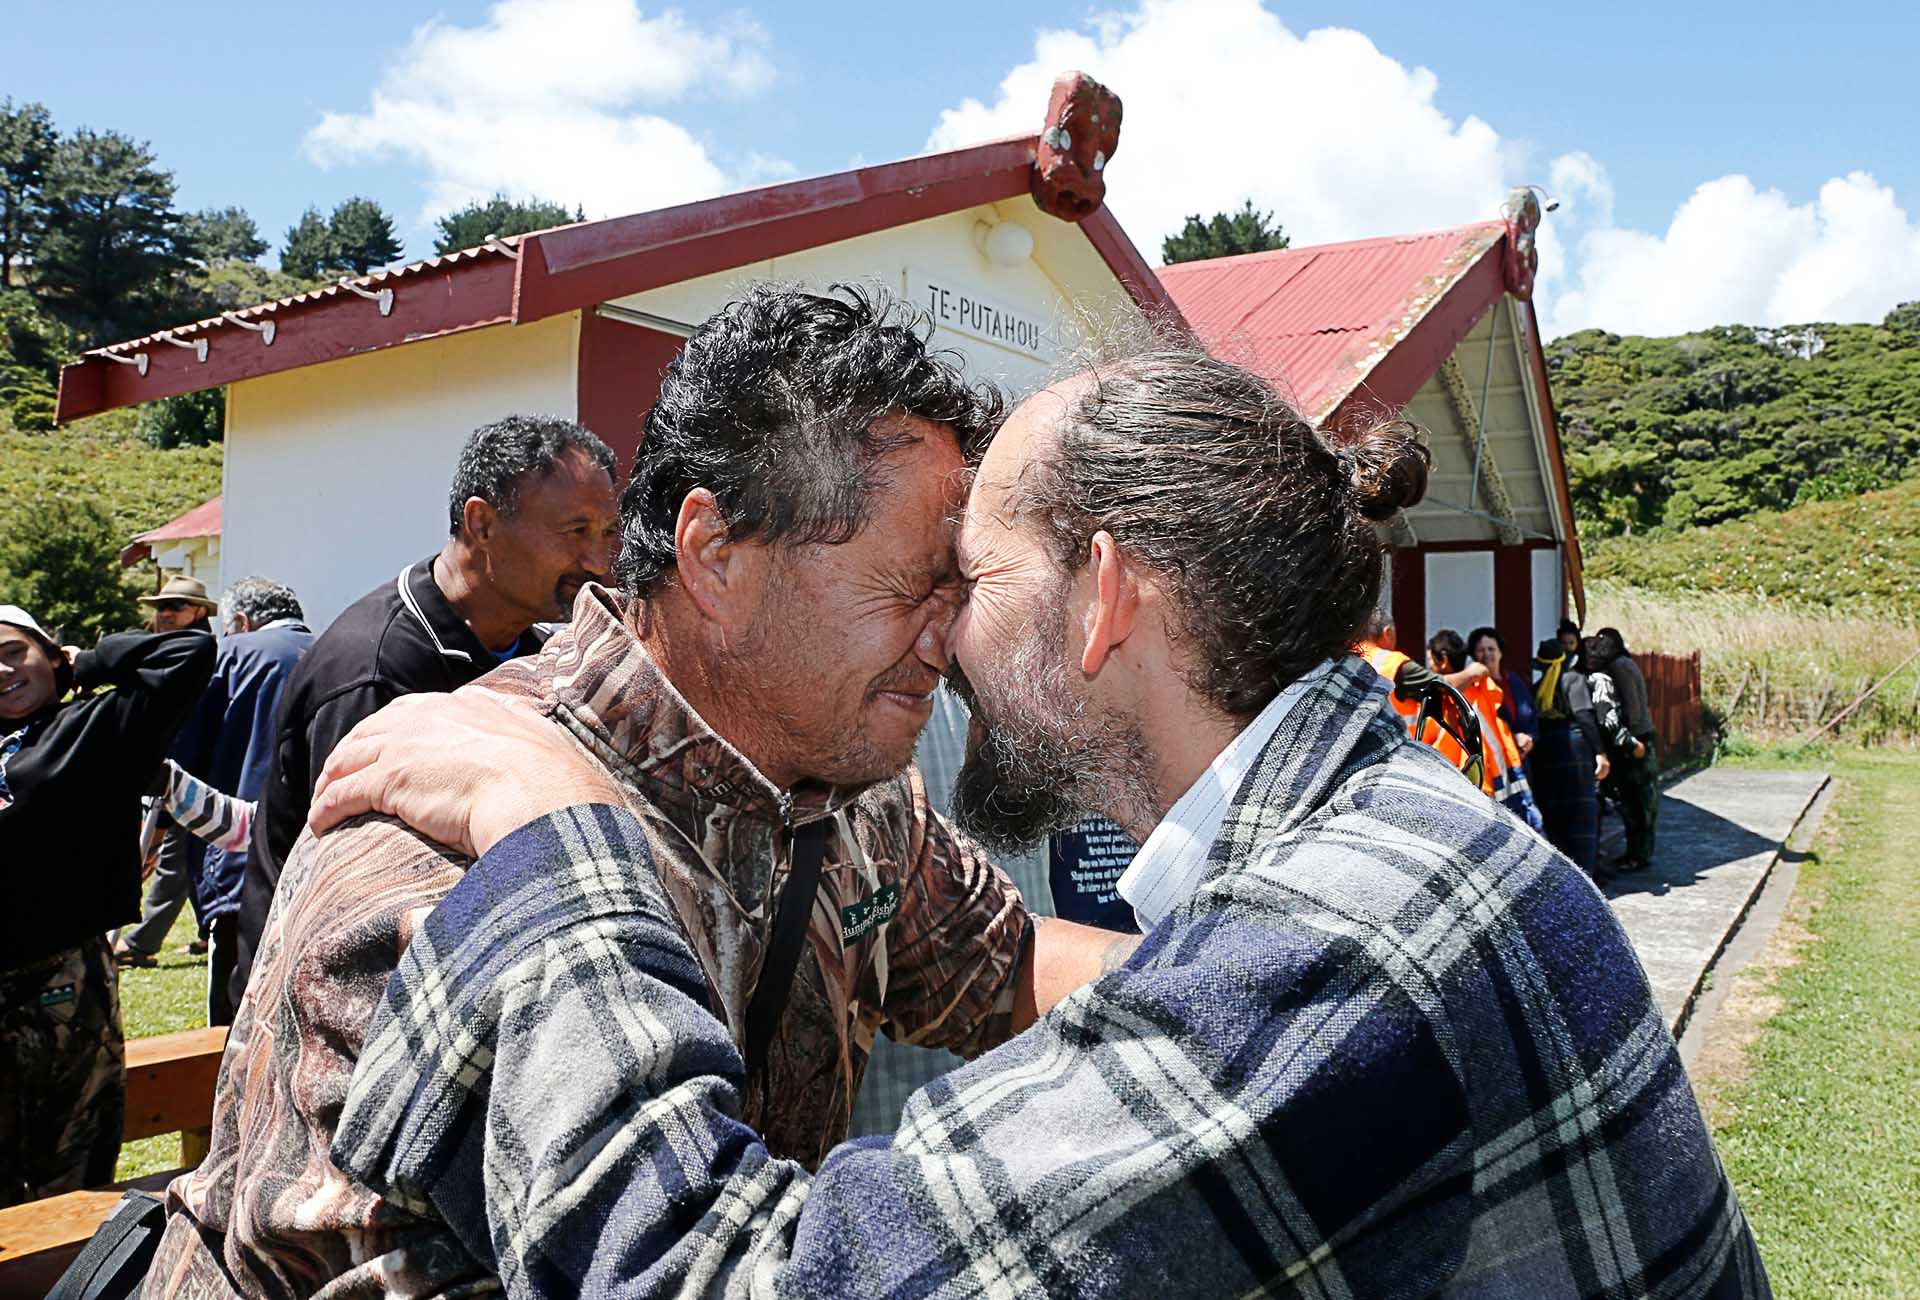 Former Greenpeace campaigner Steve Abel and Elvis Teddy greet each other at the Oil Drill Withdrawal Festival in New Zealand: The Greenpeace crew of the new Rainbow Warrior met Te Whānau a Apanui at Whangaparaoa, East Cape to celebrate the withdrawal of oil giant Petrobras which had planned to drill for deep sea oil.